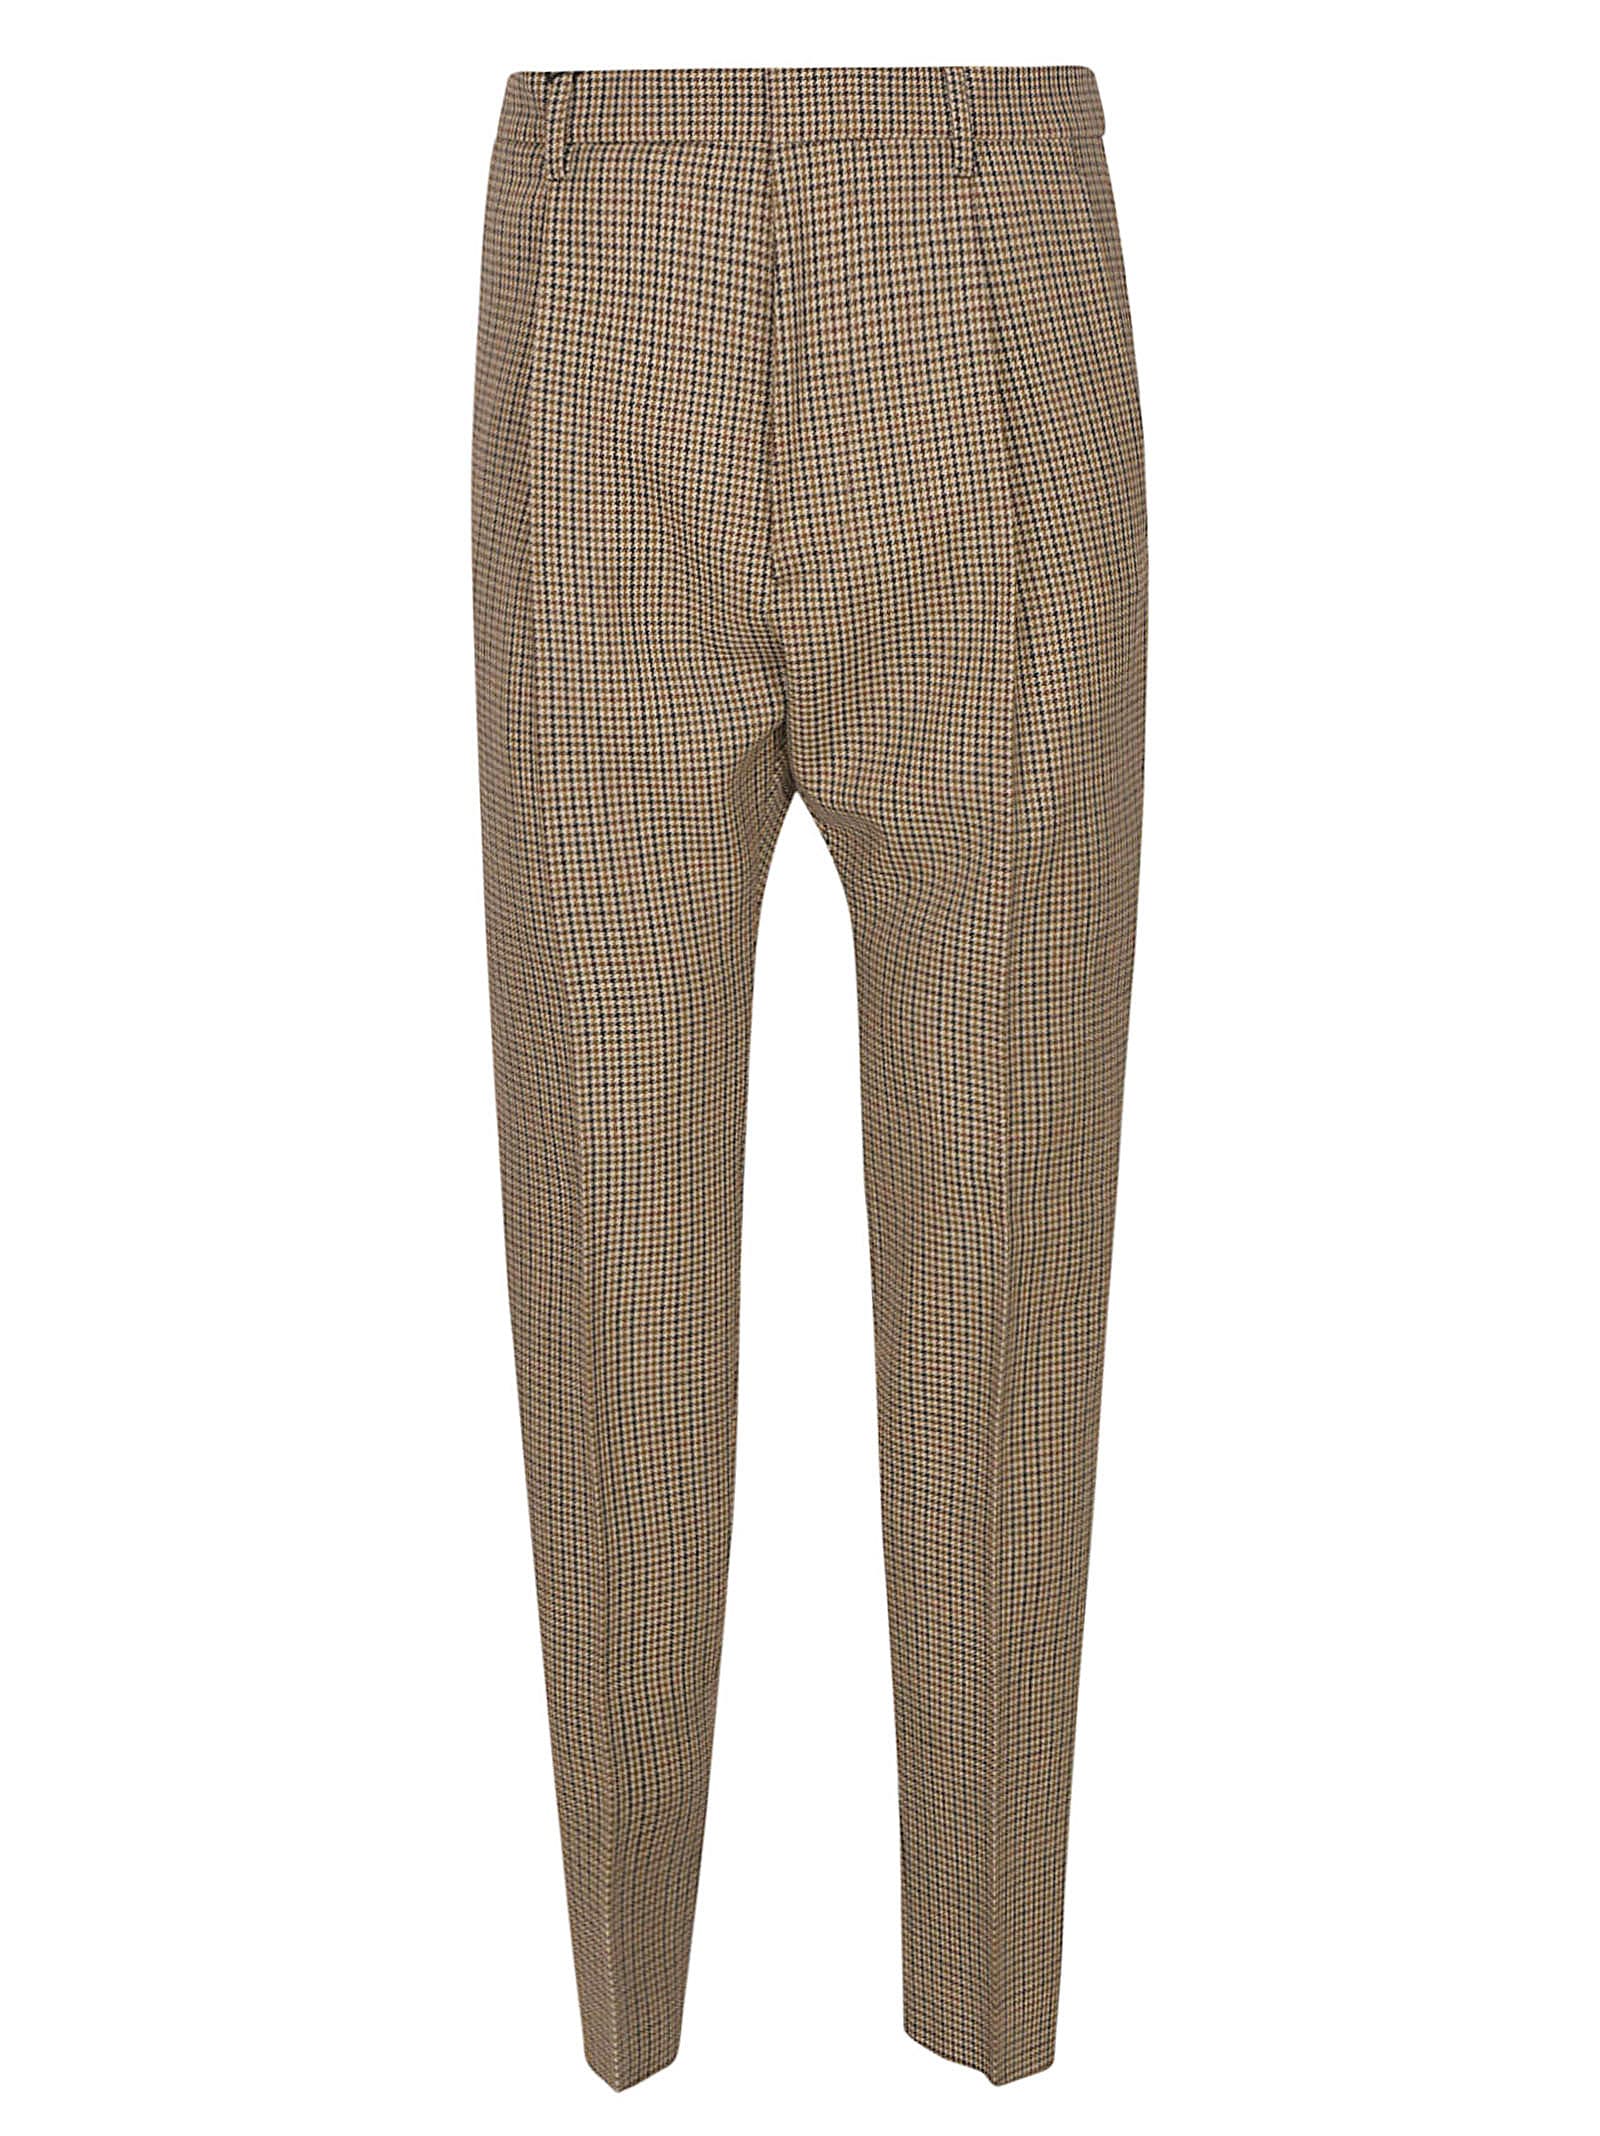 Dsquared2 Houndstooth Printed Trousers